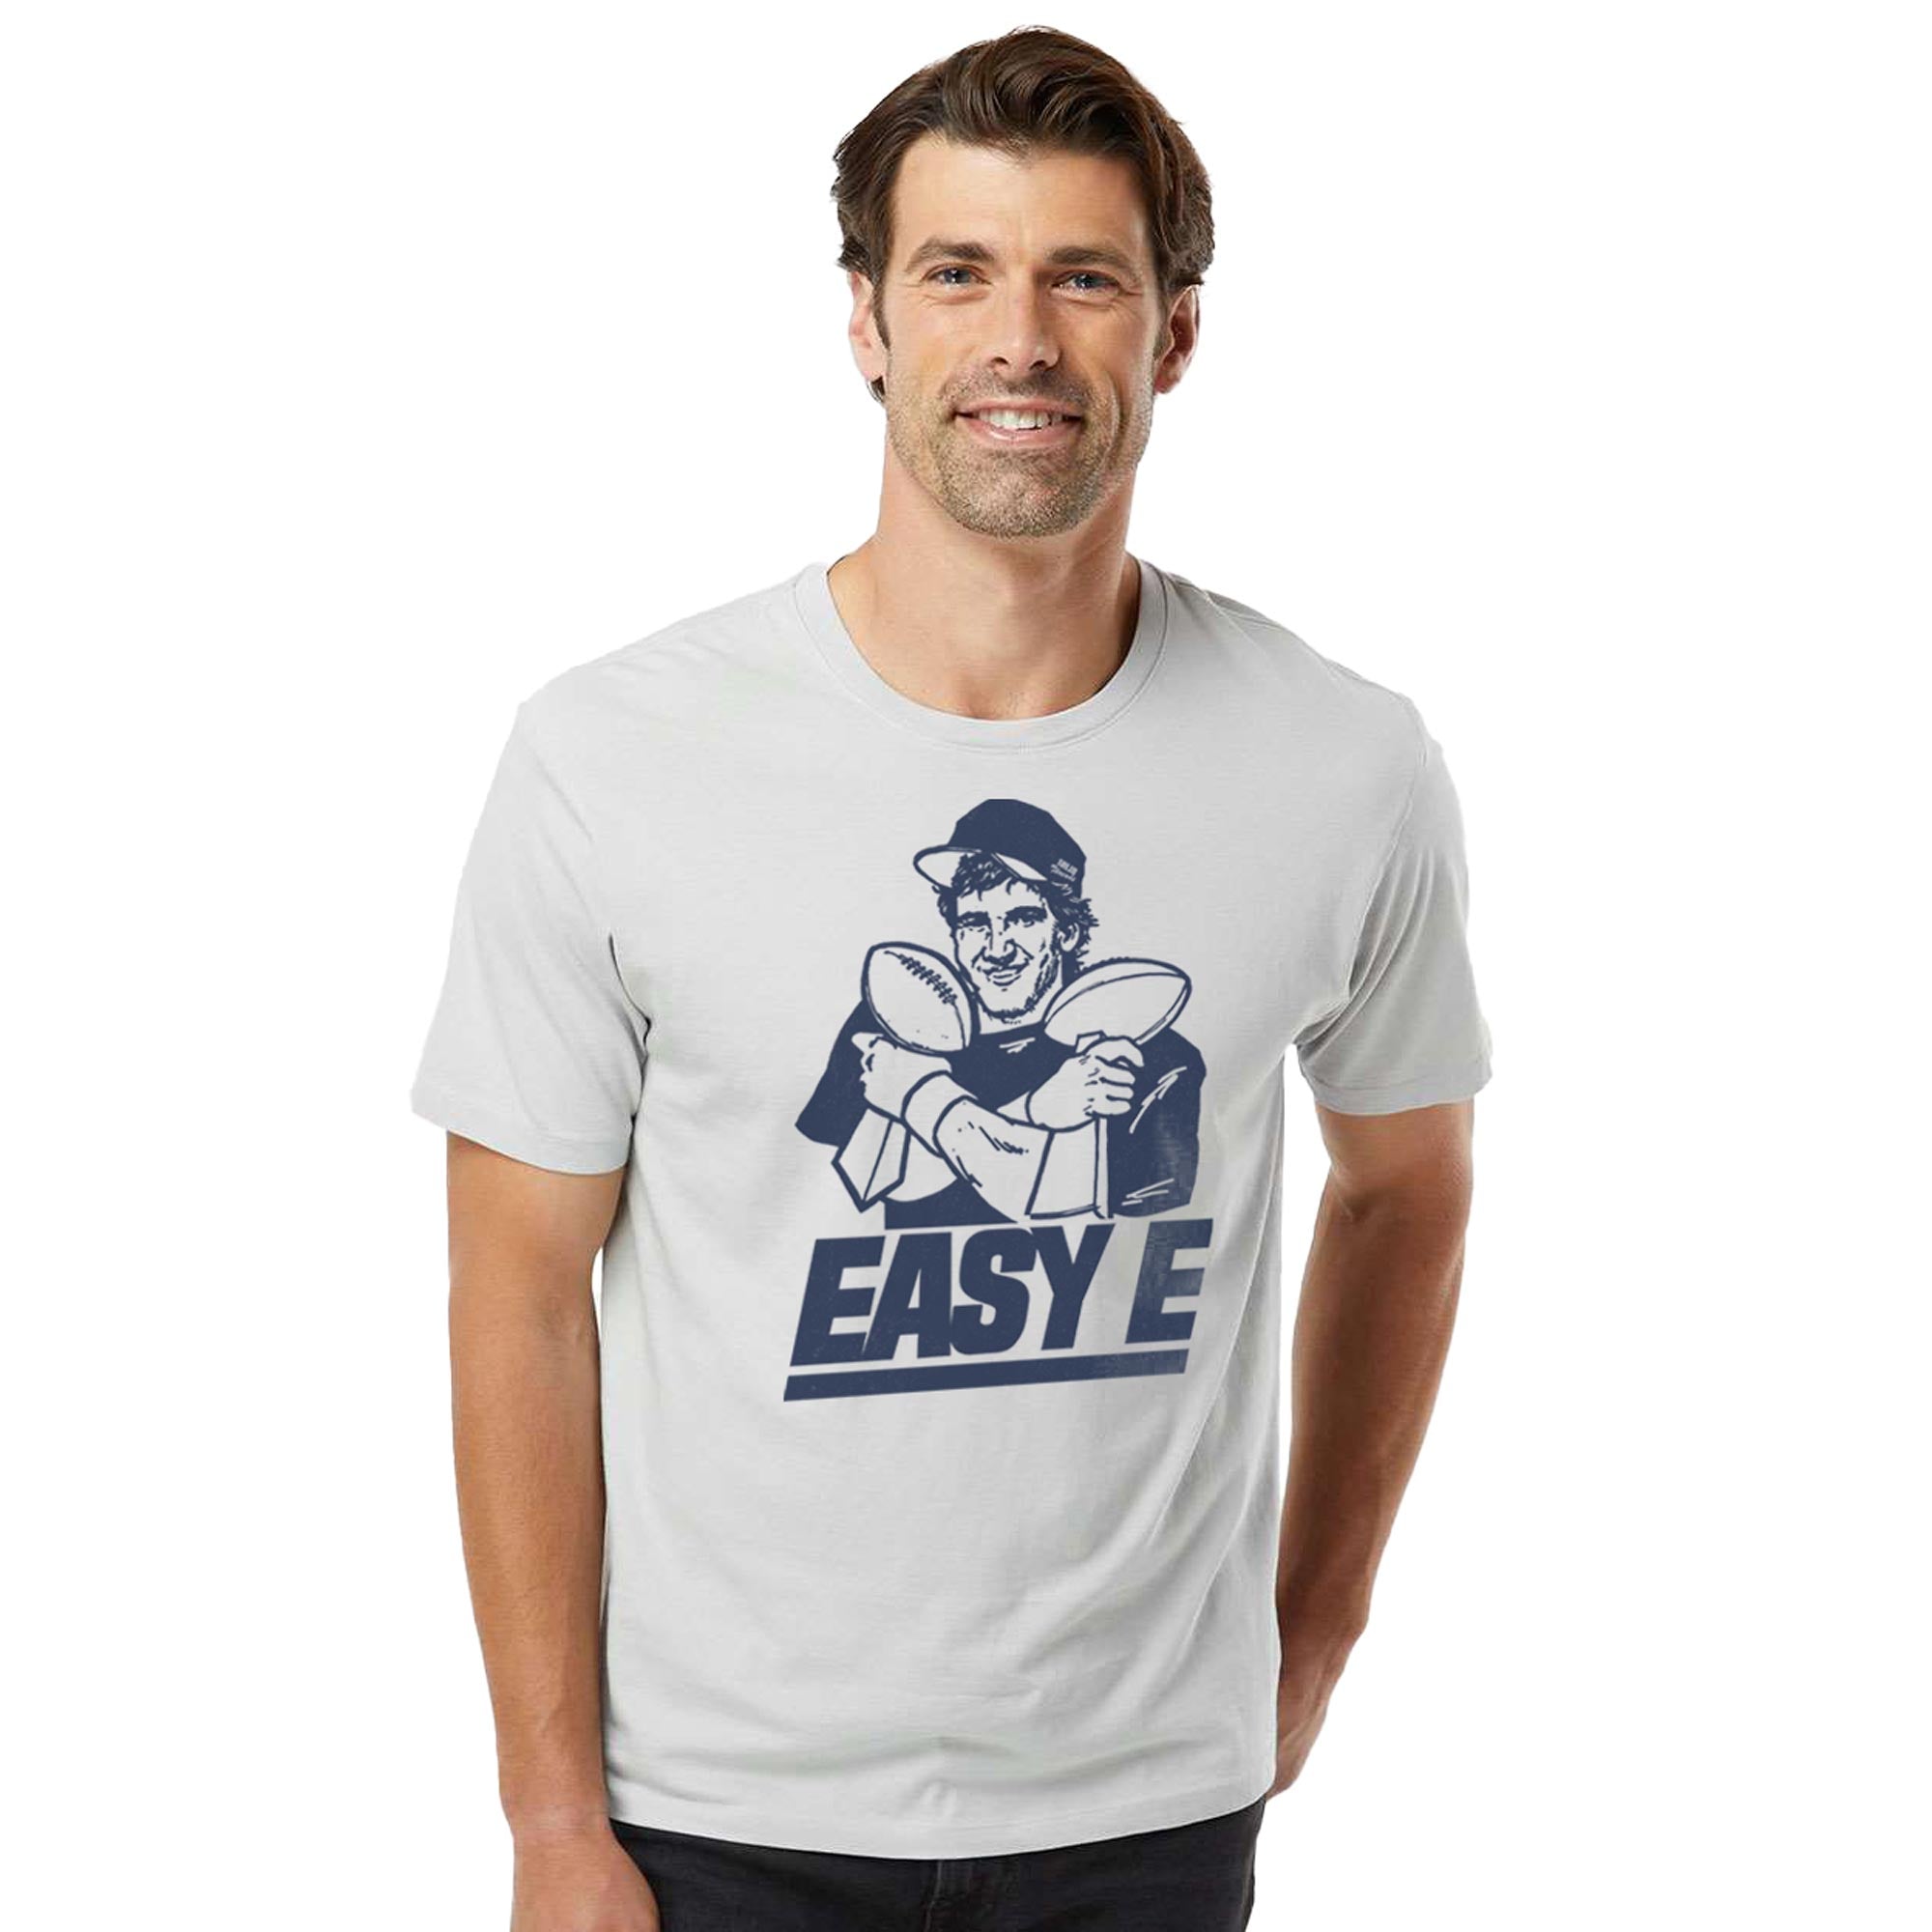 Easy E Vintage Organic Cotton T-shirt | Funny Ny Giants  Tee | Solid Threads